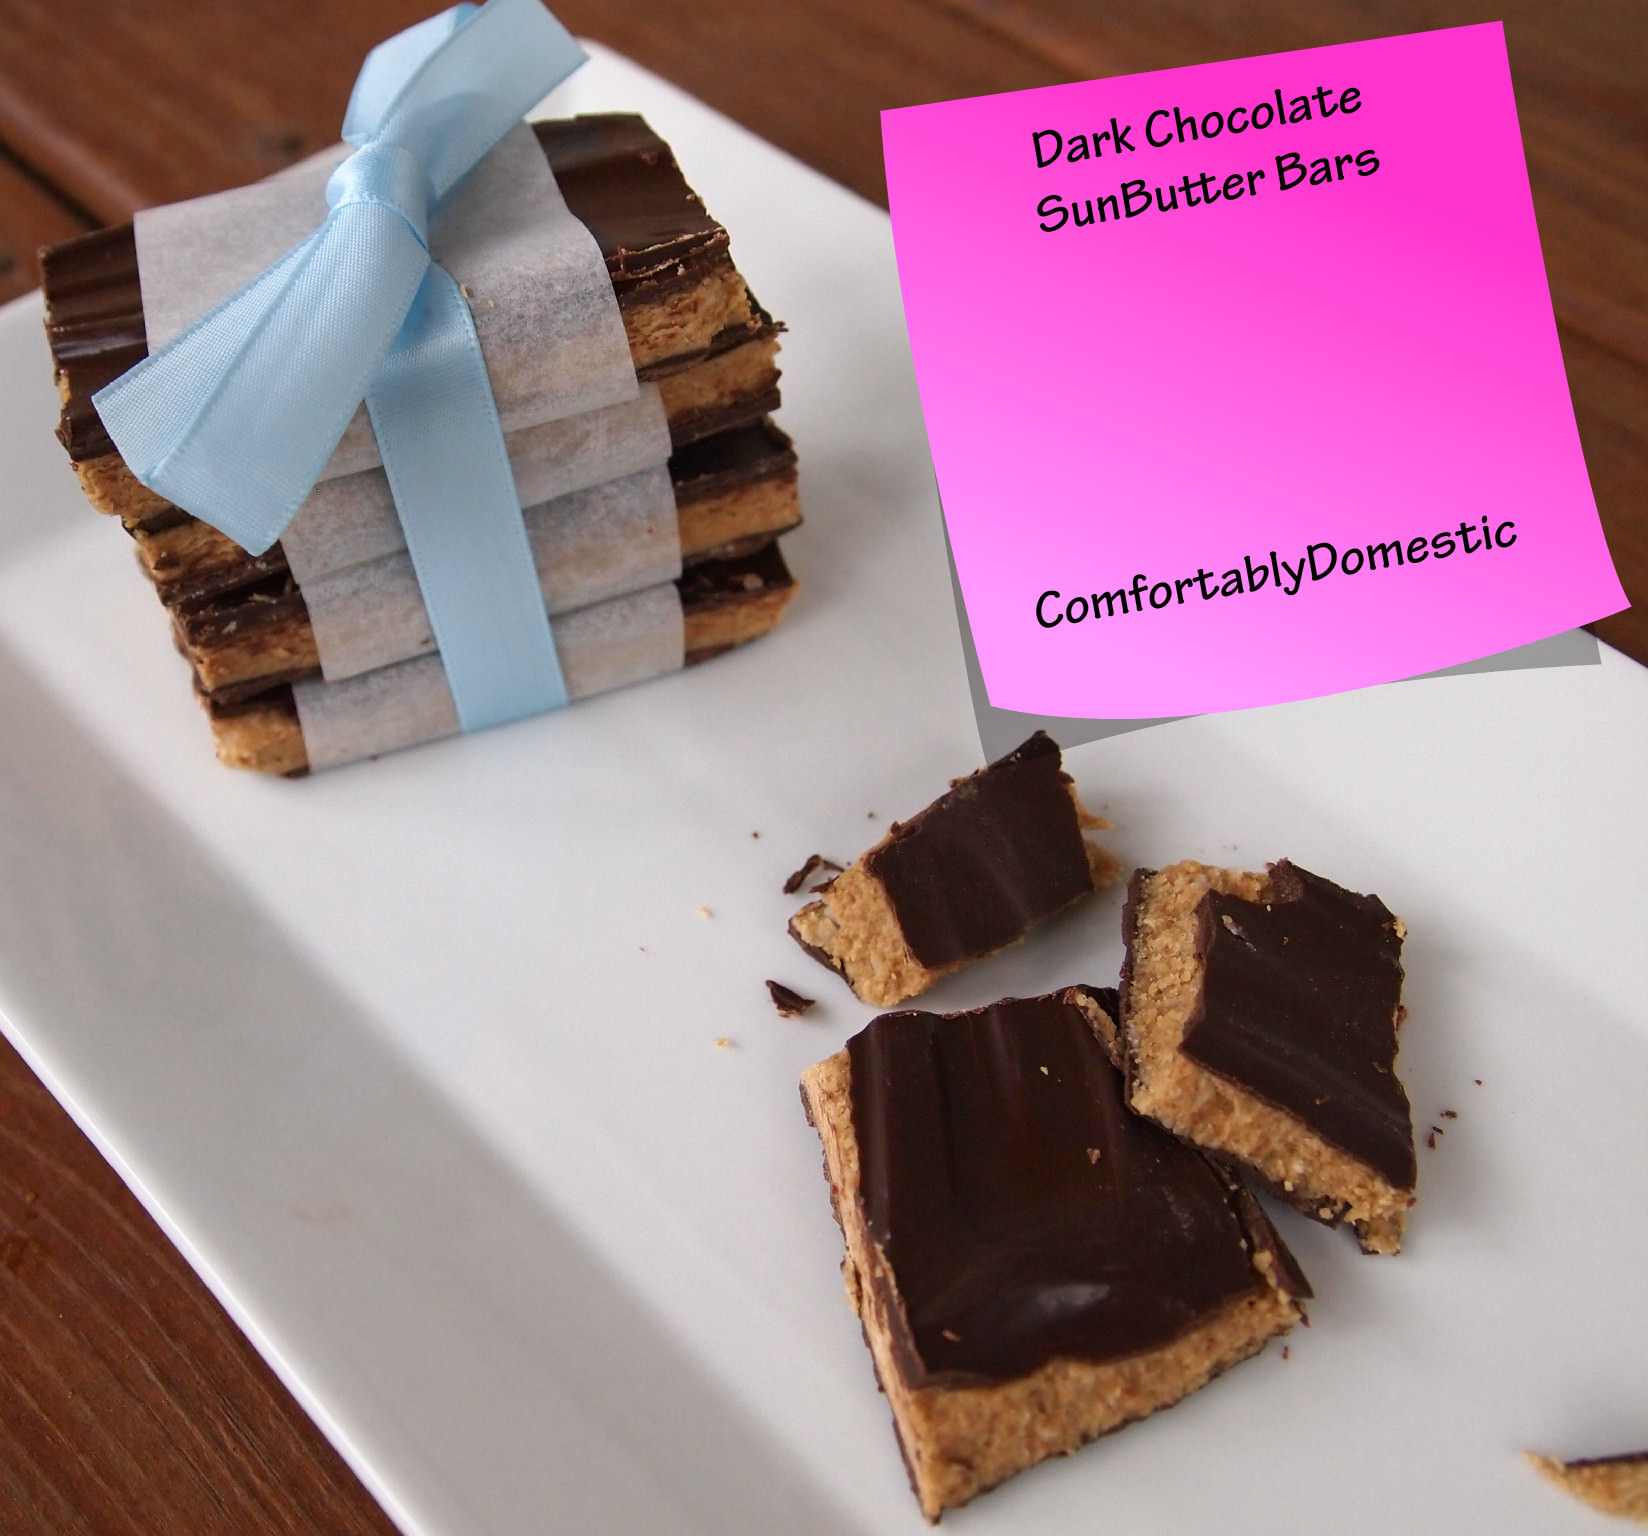 Dark Chocolate SunButter Candy Bars | ComfortablyDomestic.com are a delicious, allergy friendly copy cat of a Reese's peanut butter cup because it's nut free!